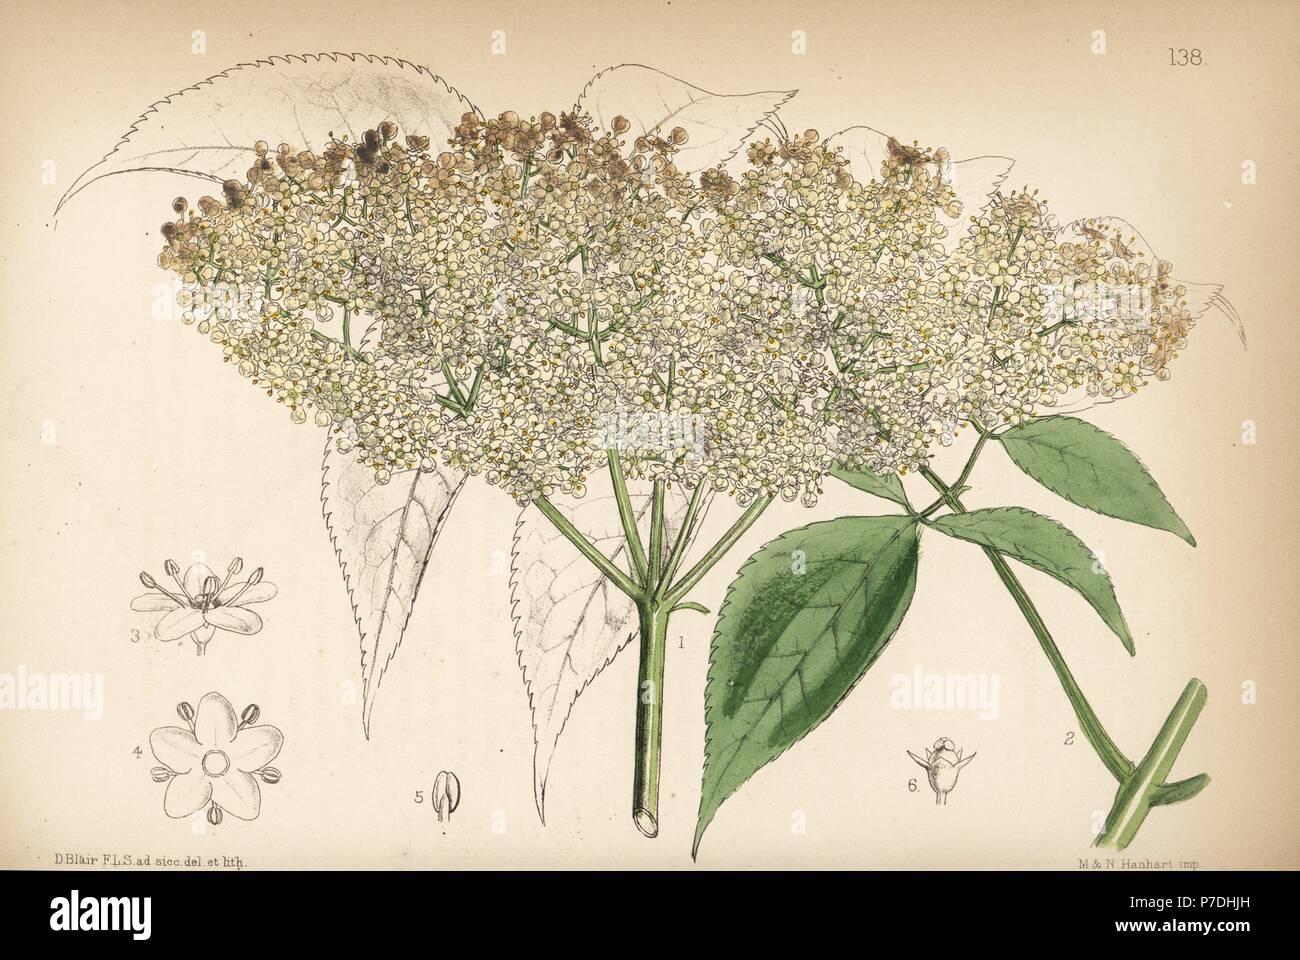 Common American elderberry, Sambucus canadensis. Handcoloured lithograph by Hanhart after a botanical illustration by David Blair from Robert Bentley and Henry Trimen's Medicinal Plants, London, 1880. Stock Photo